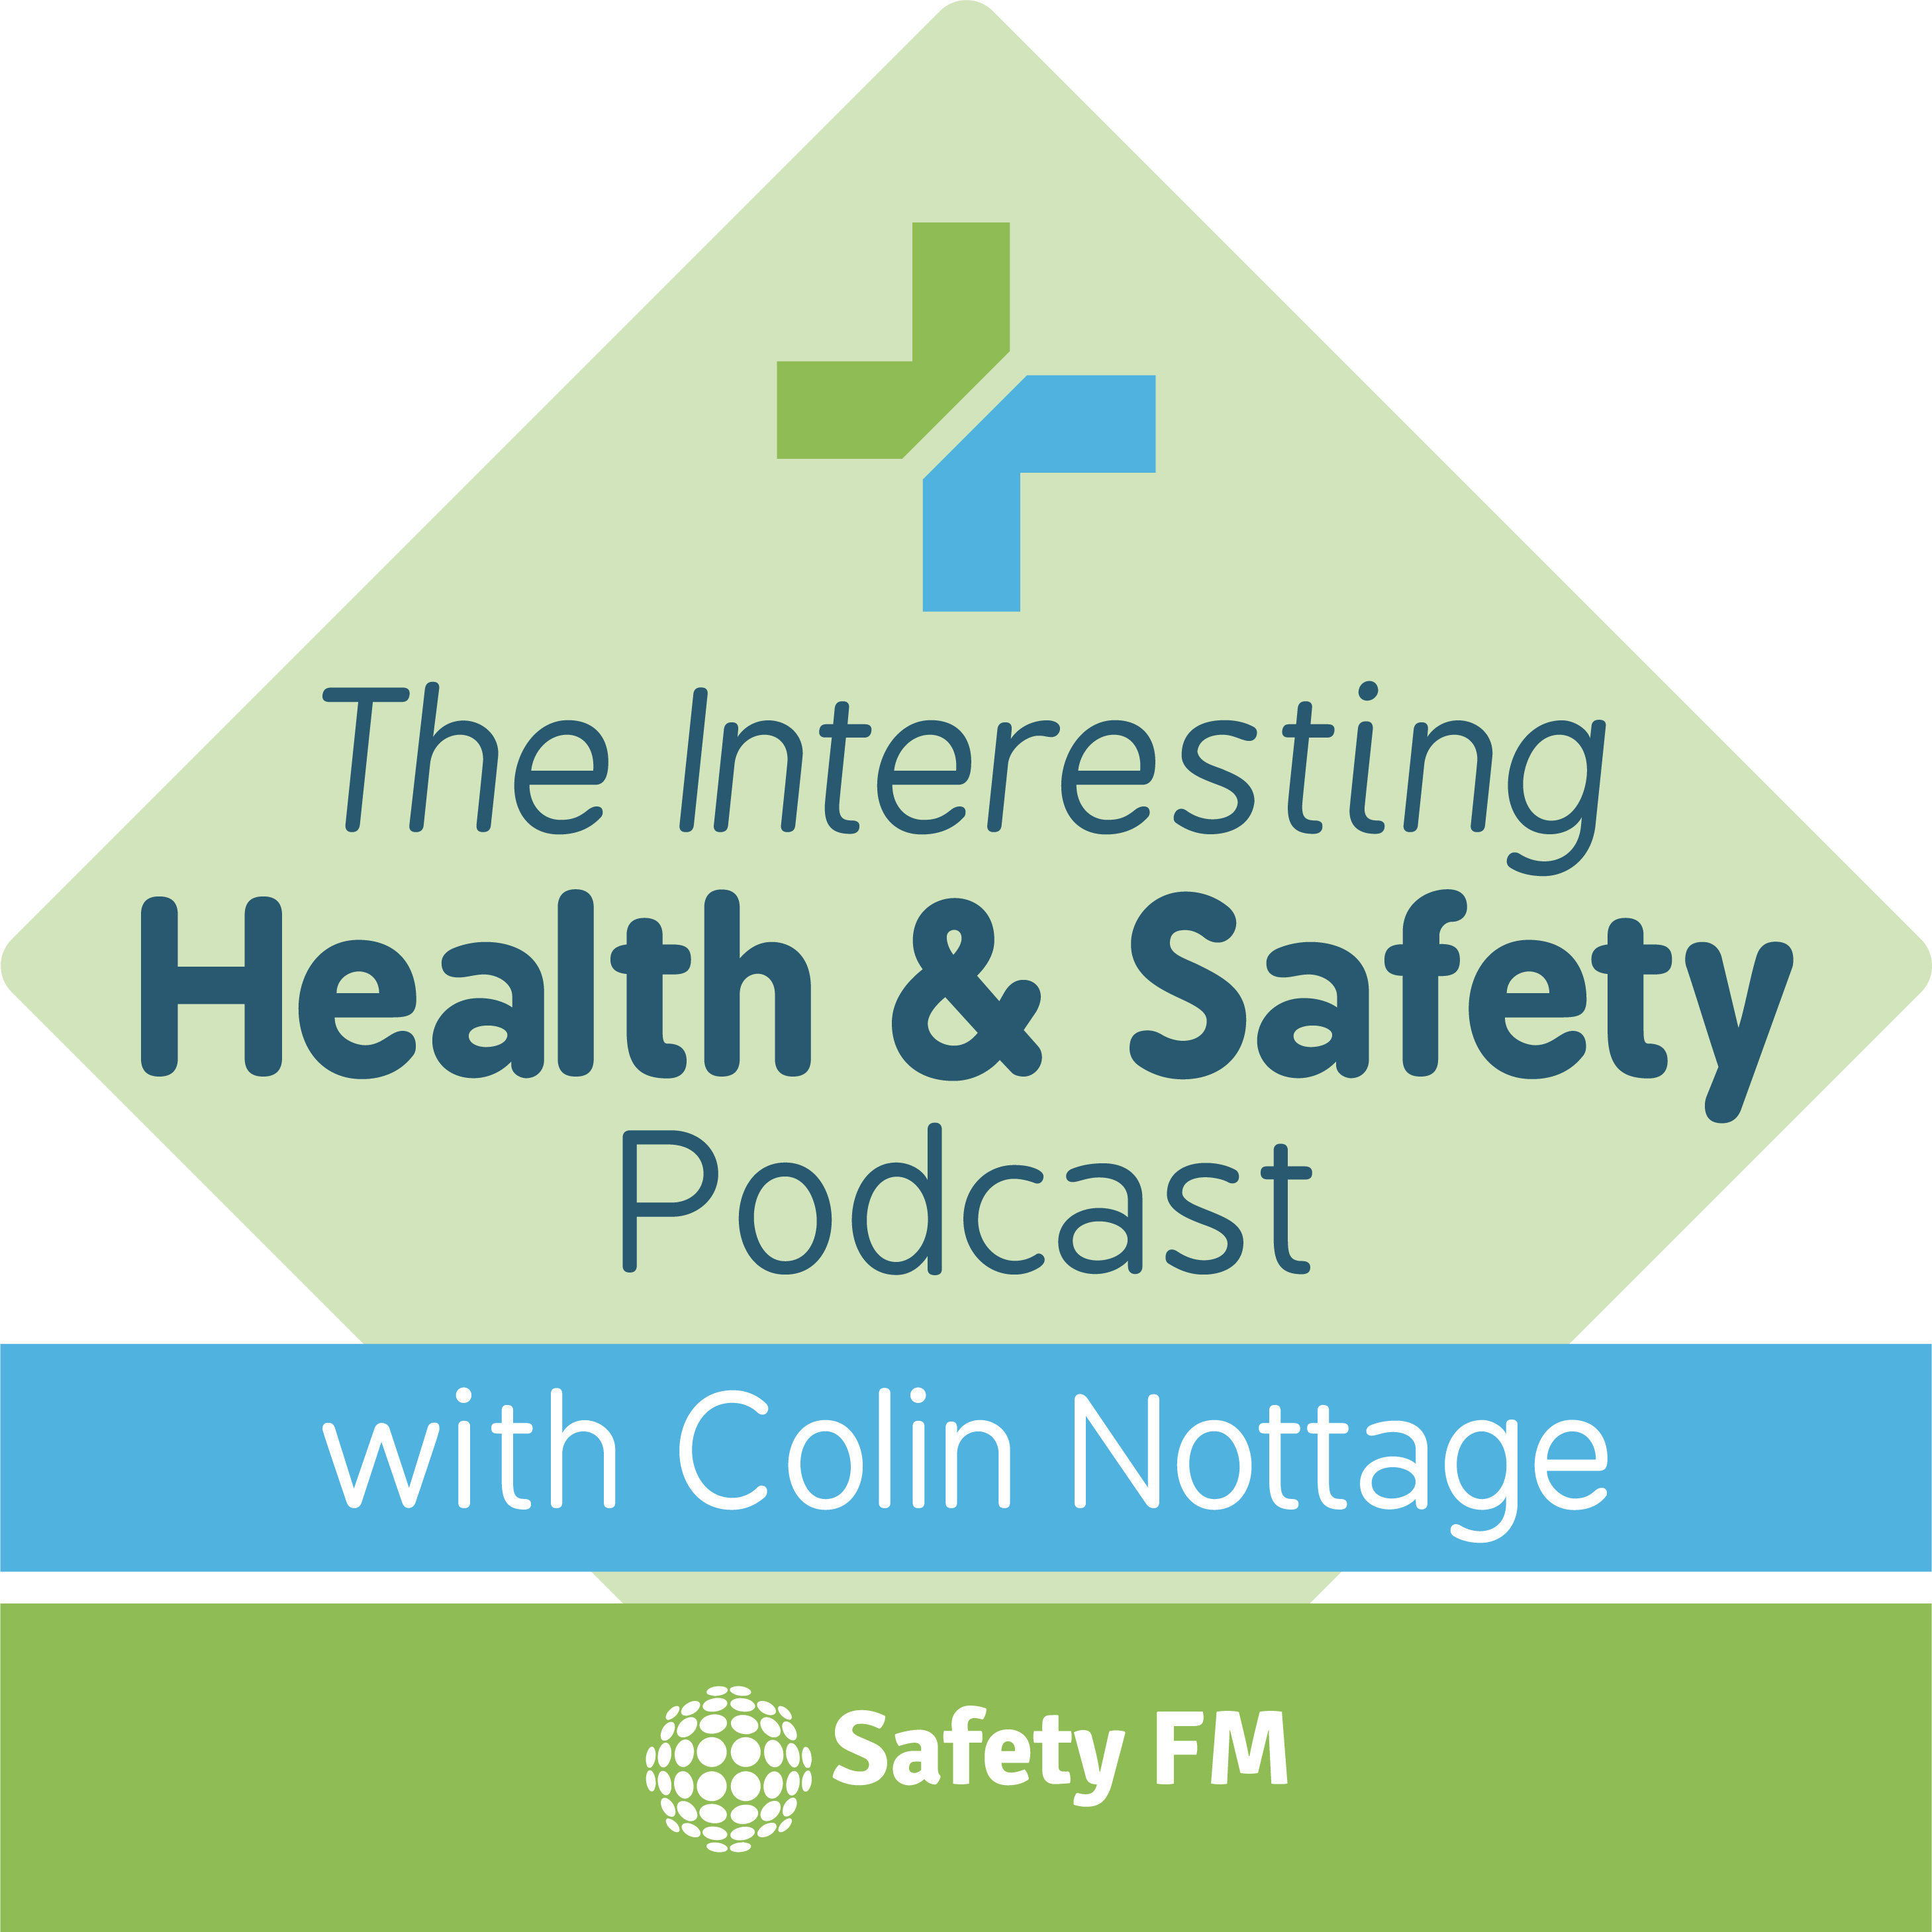 The Impact Of COVID Upon Safety - Part 2 - with Stuart Hughes and David Gold